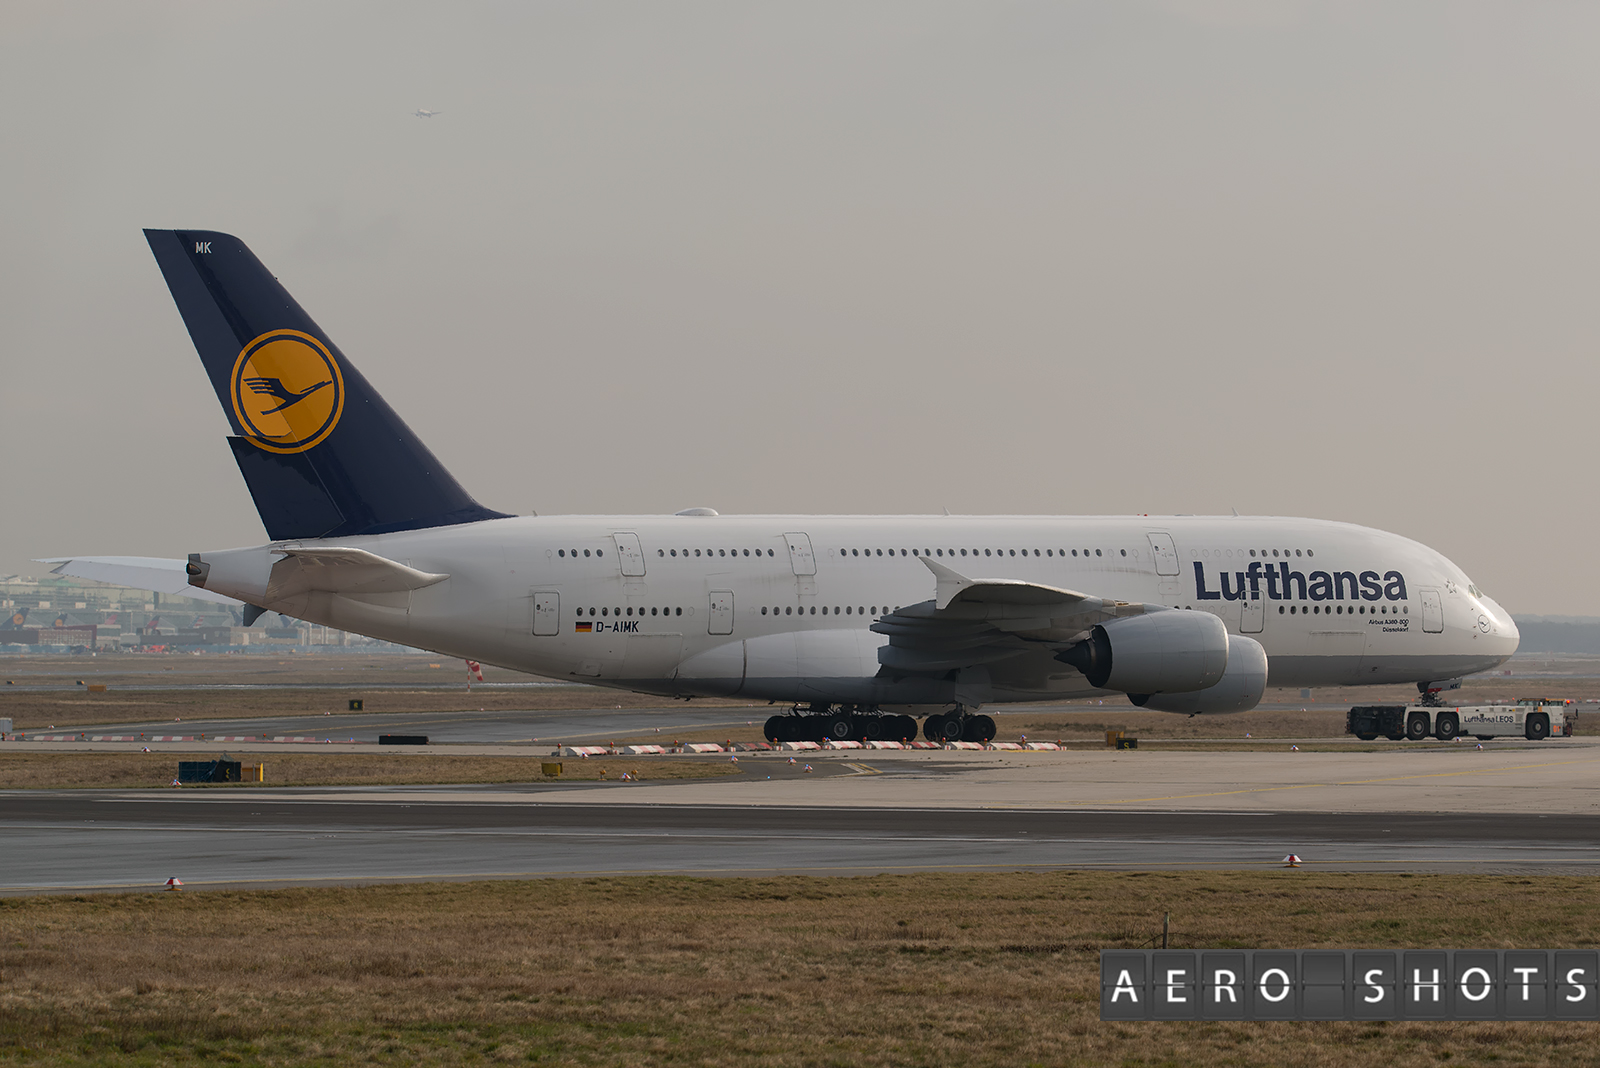 D-AIMK diverted to JFK after Lufthansa received a bomb threat